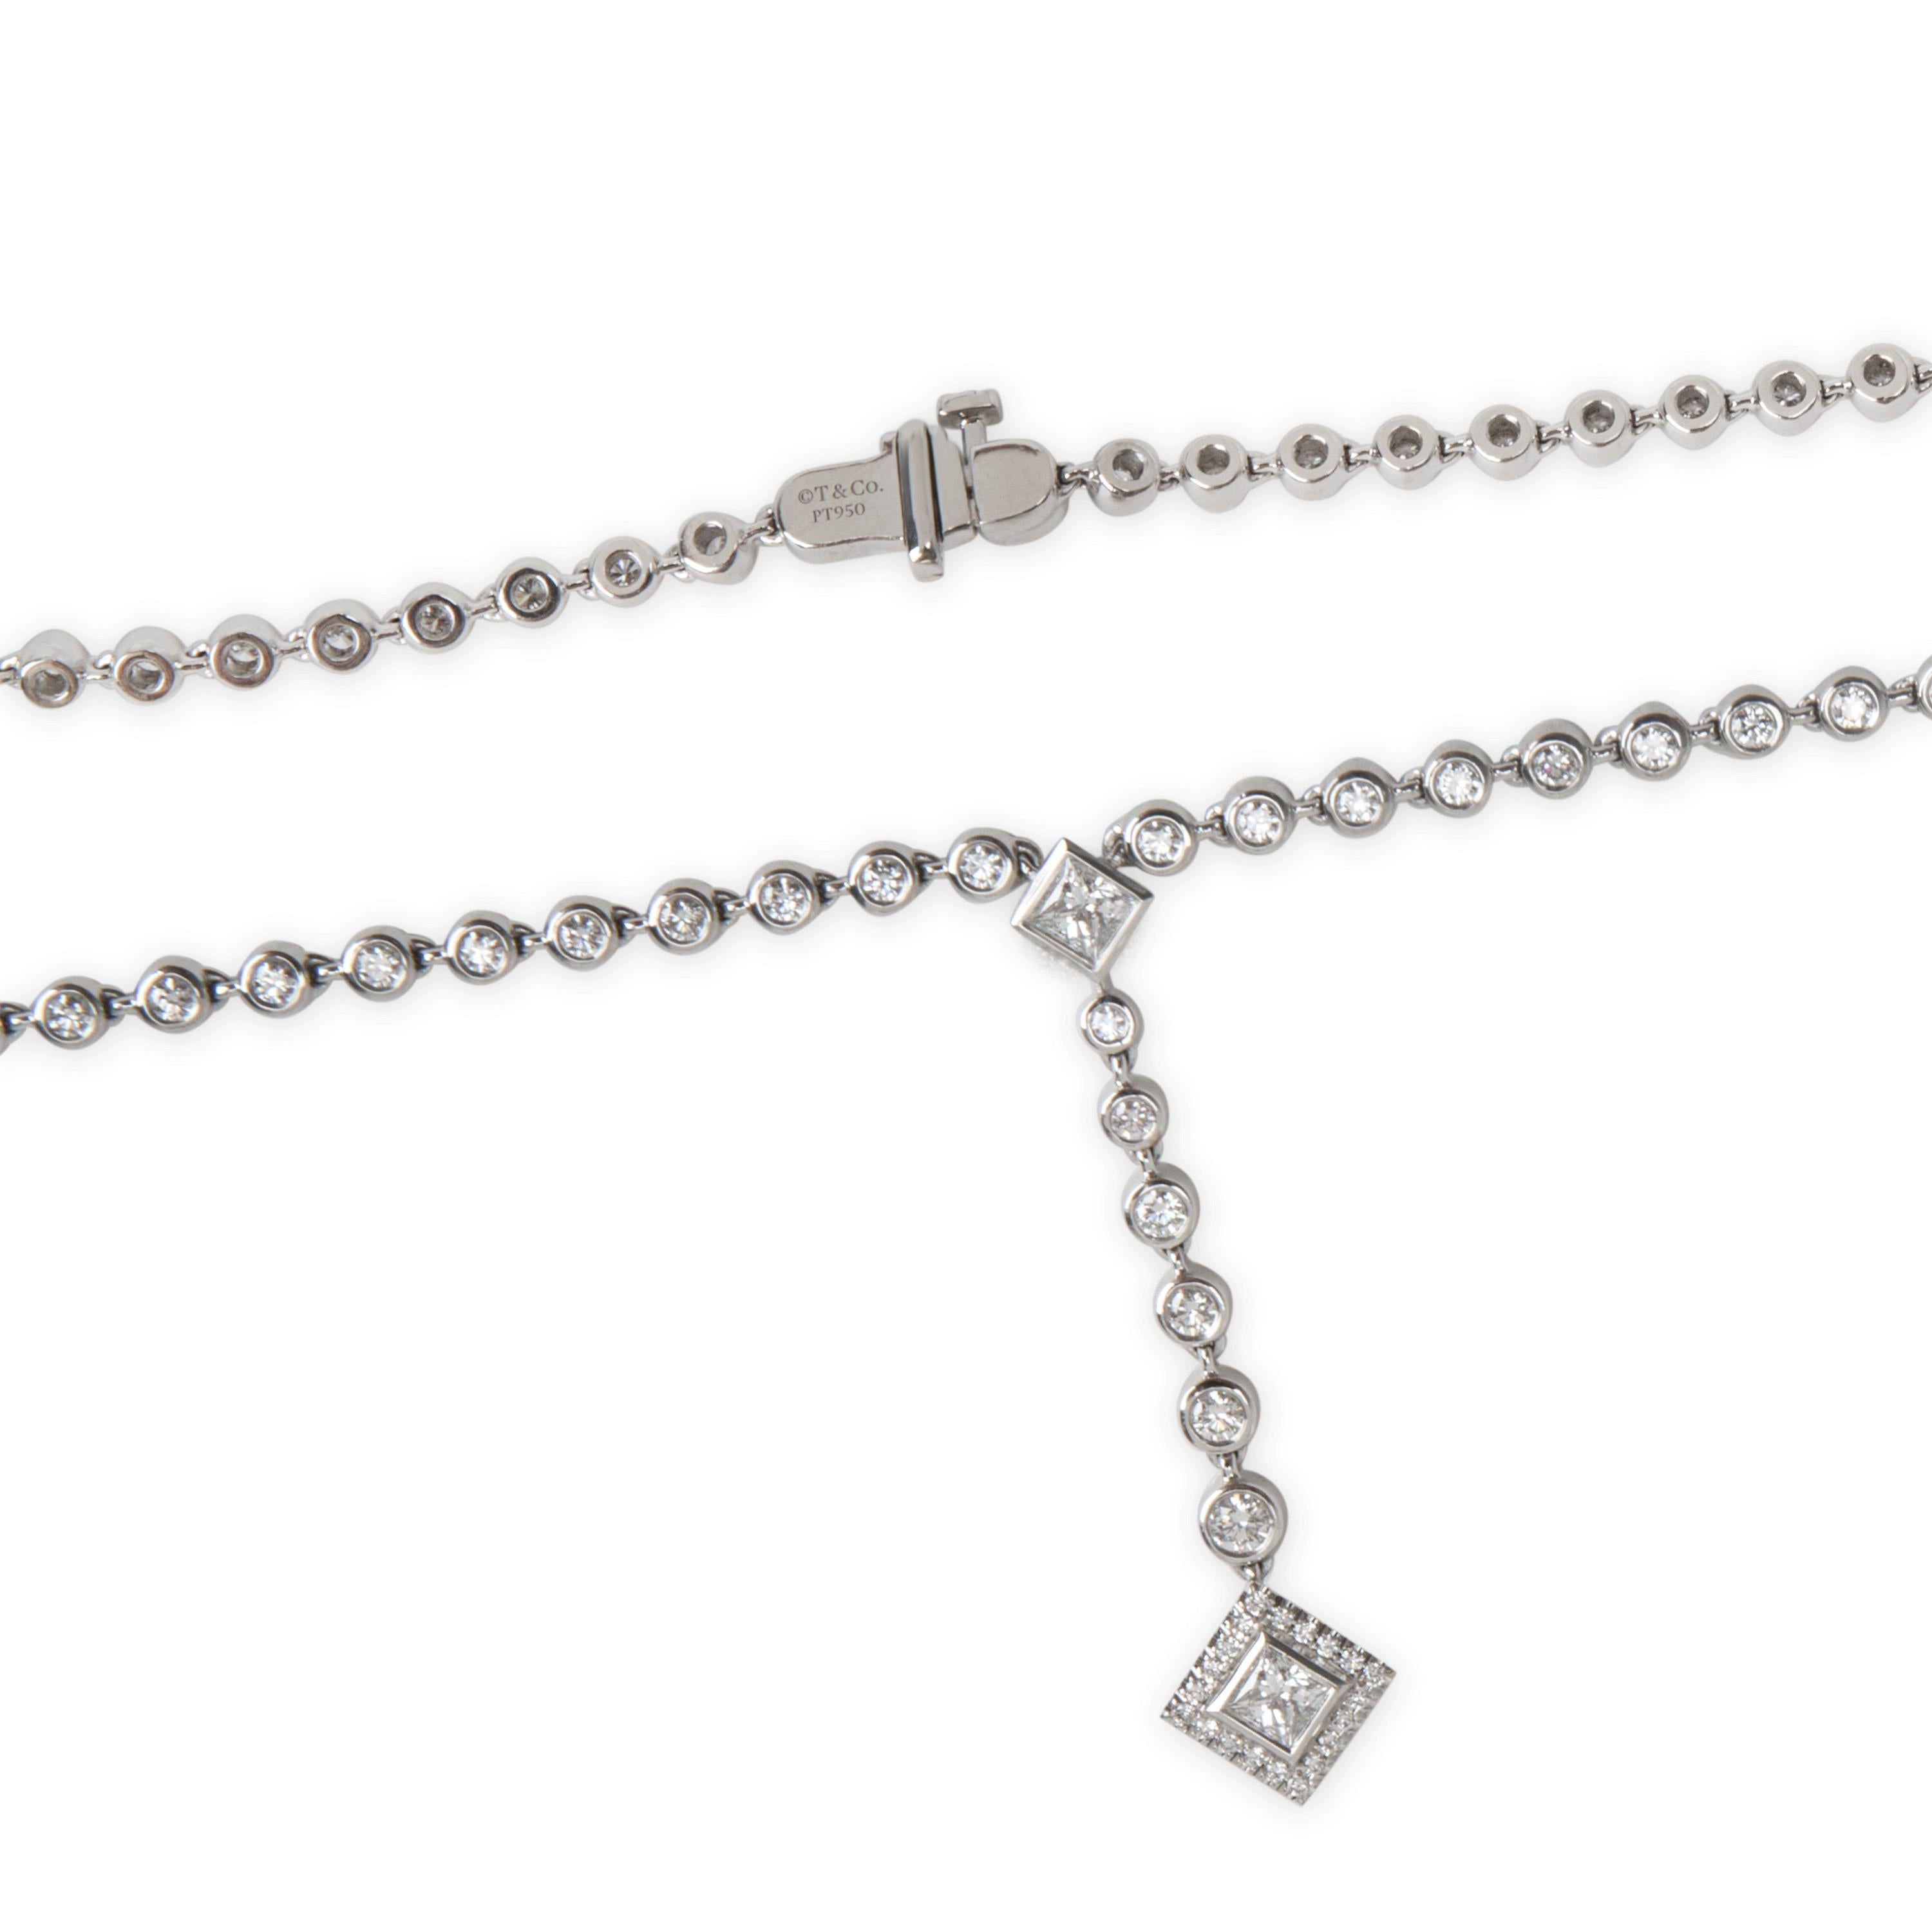 Tiffany & Co. Diamond Grace Necklace in Platinum '4.10 Carat' In Excellent Condition For Sale In New York, NY